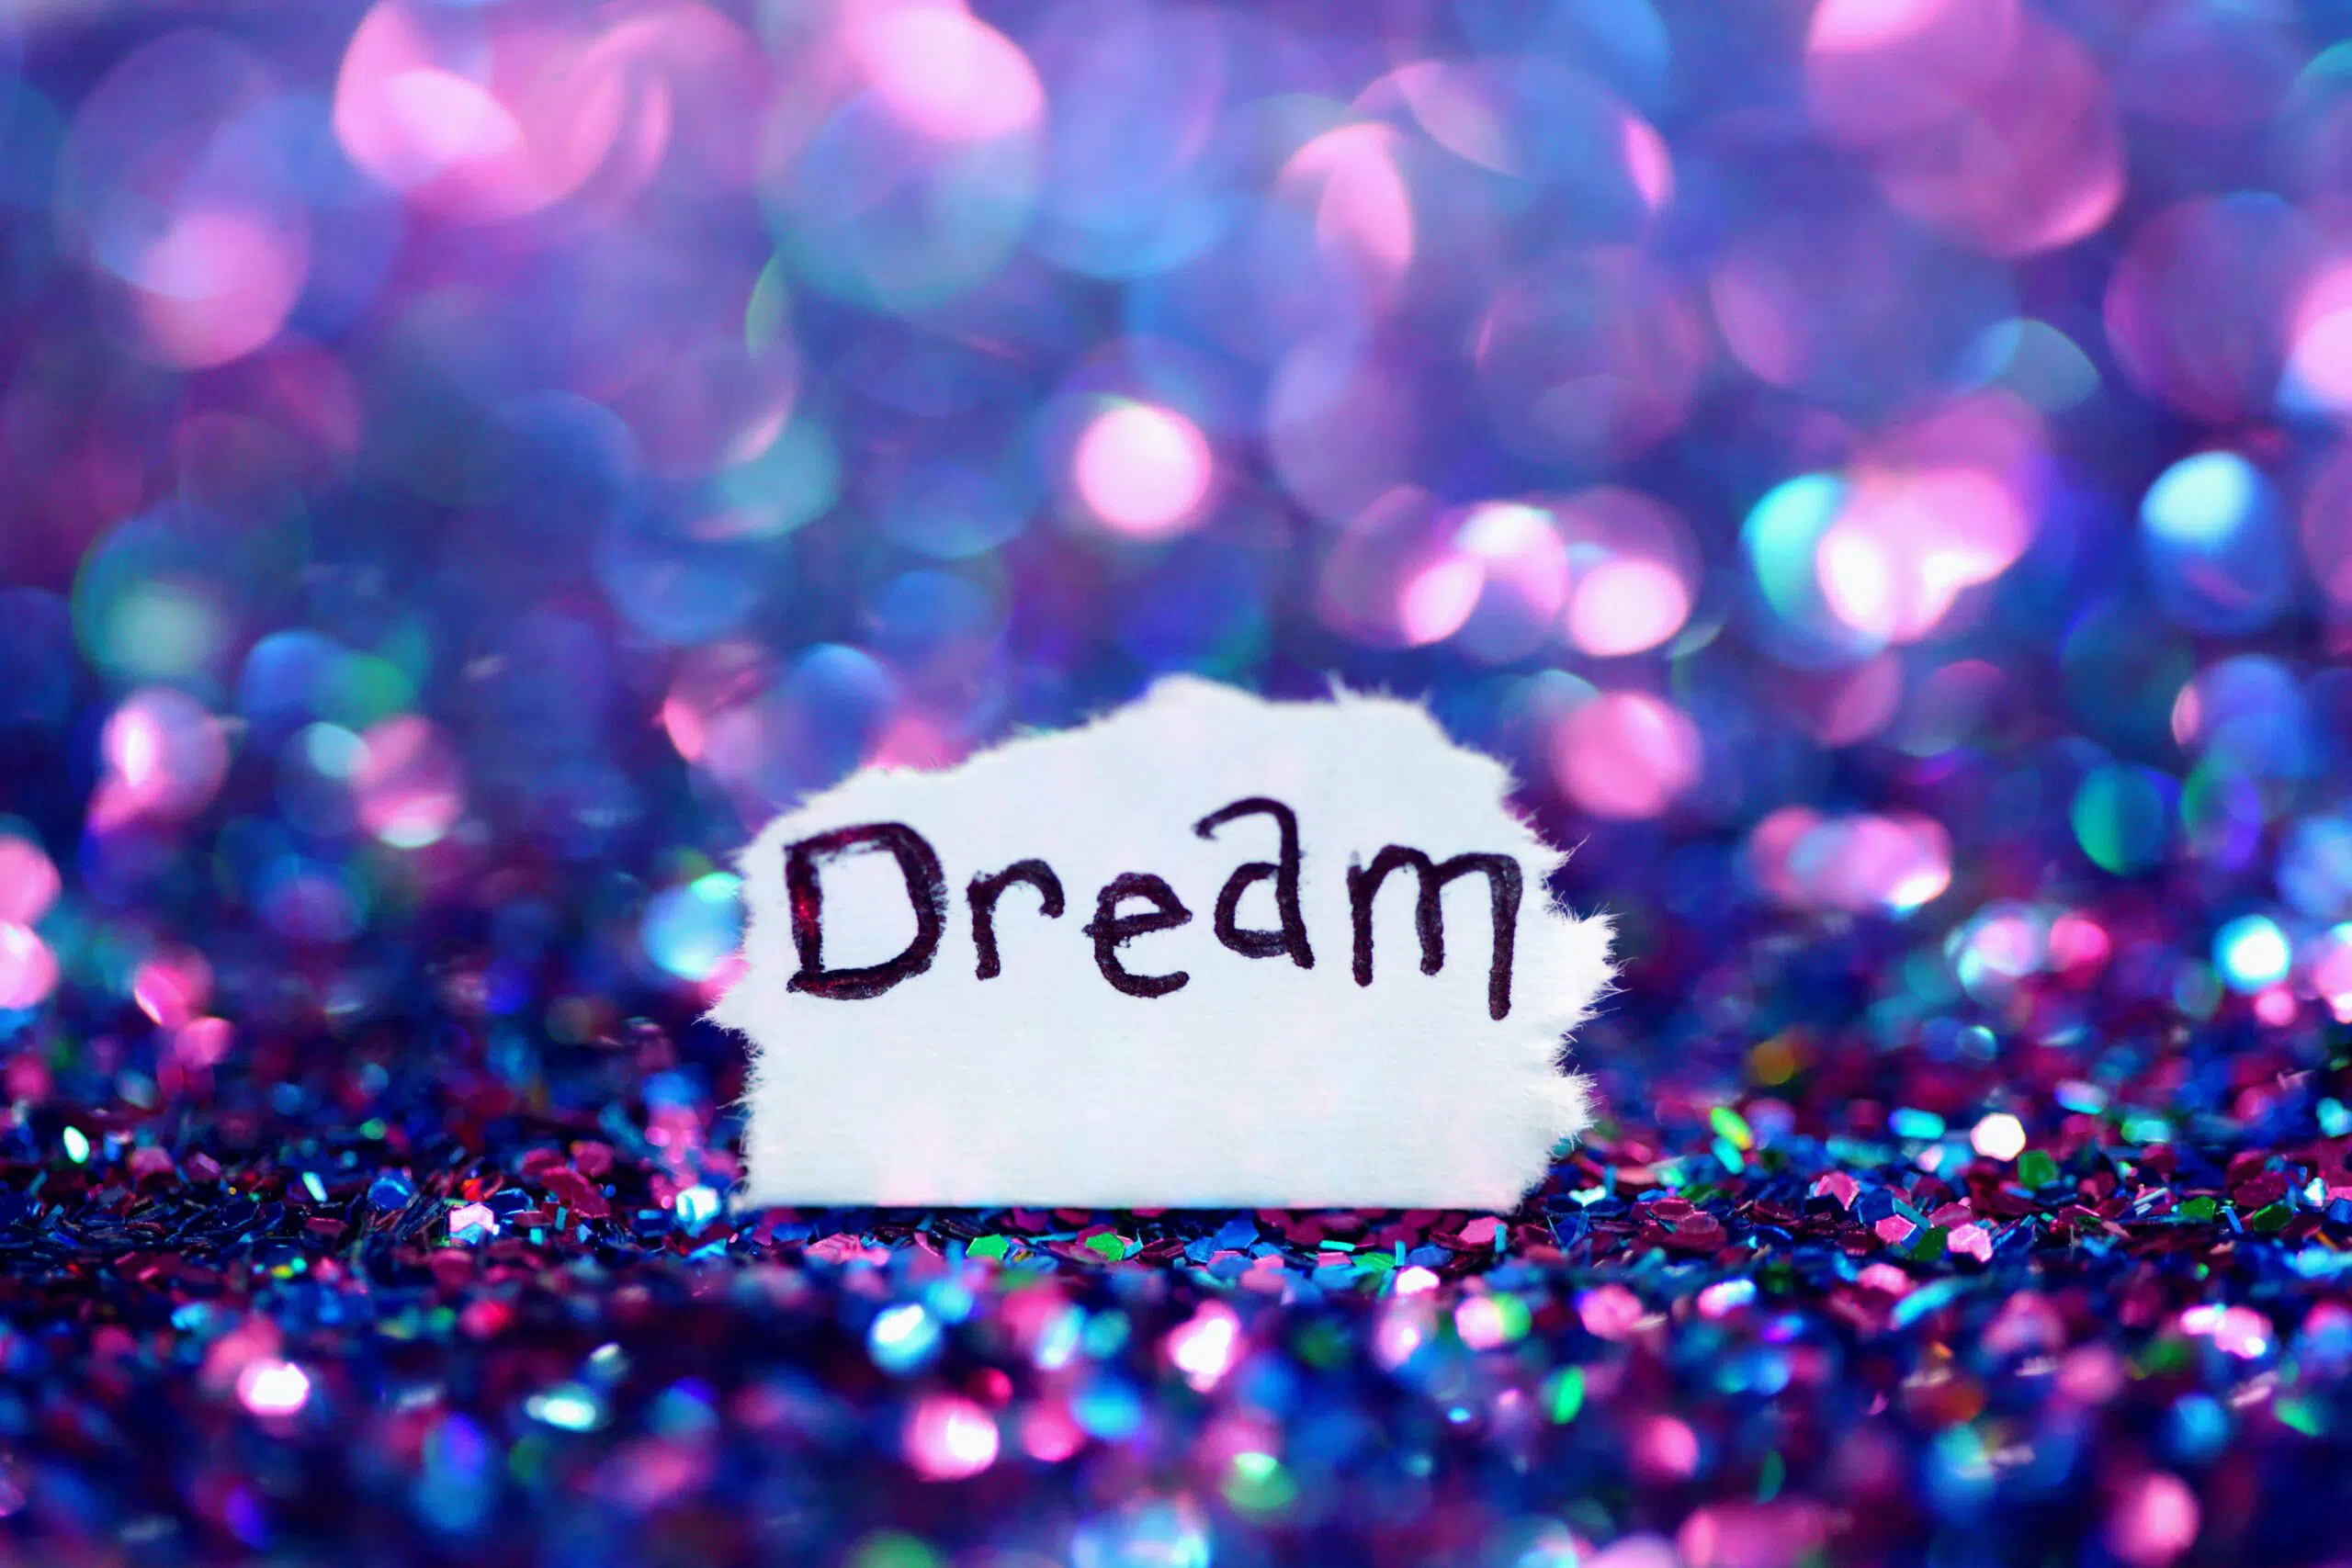 Decorative version of the word "Dream"